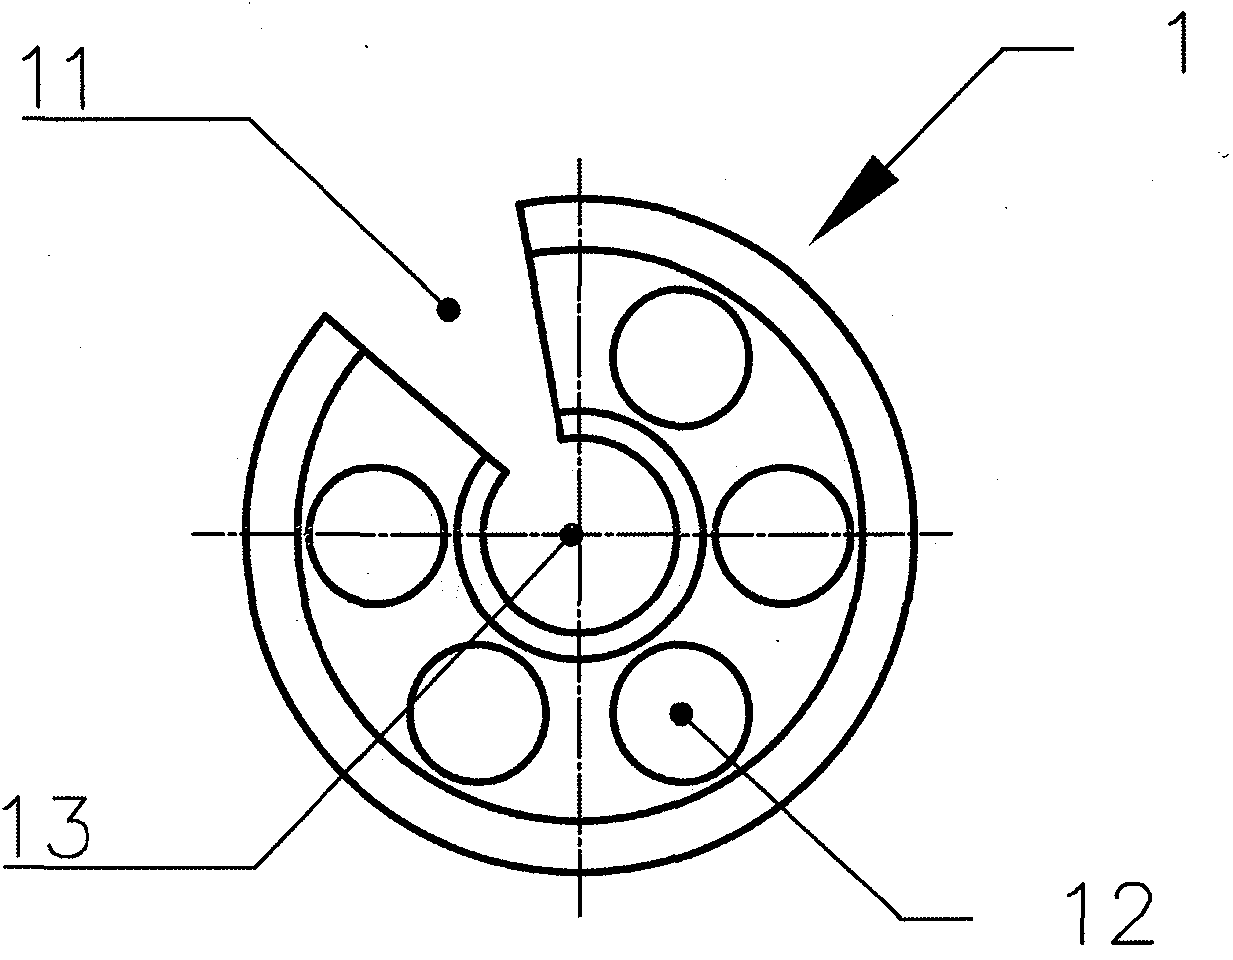 Millimeter wave coaxial connector with novel insulating support structure